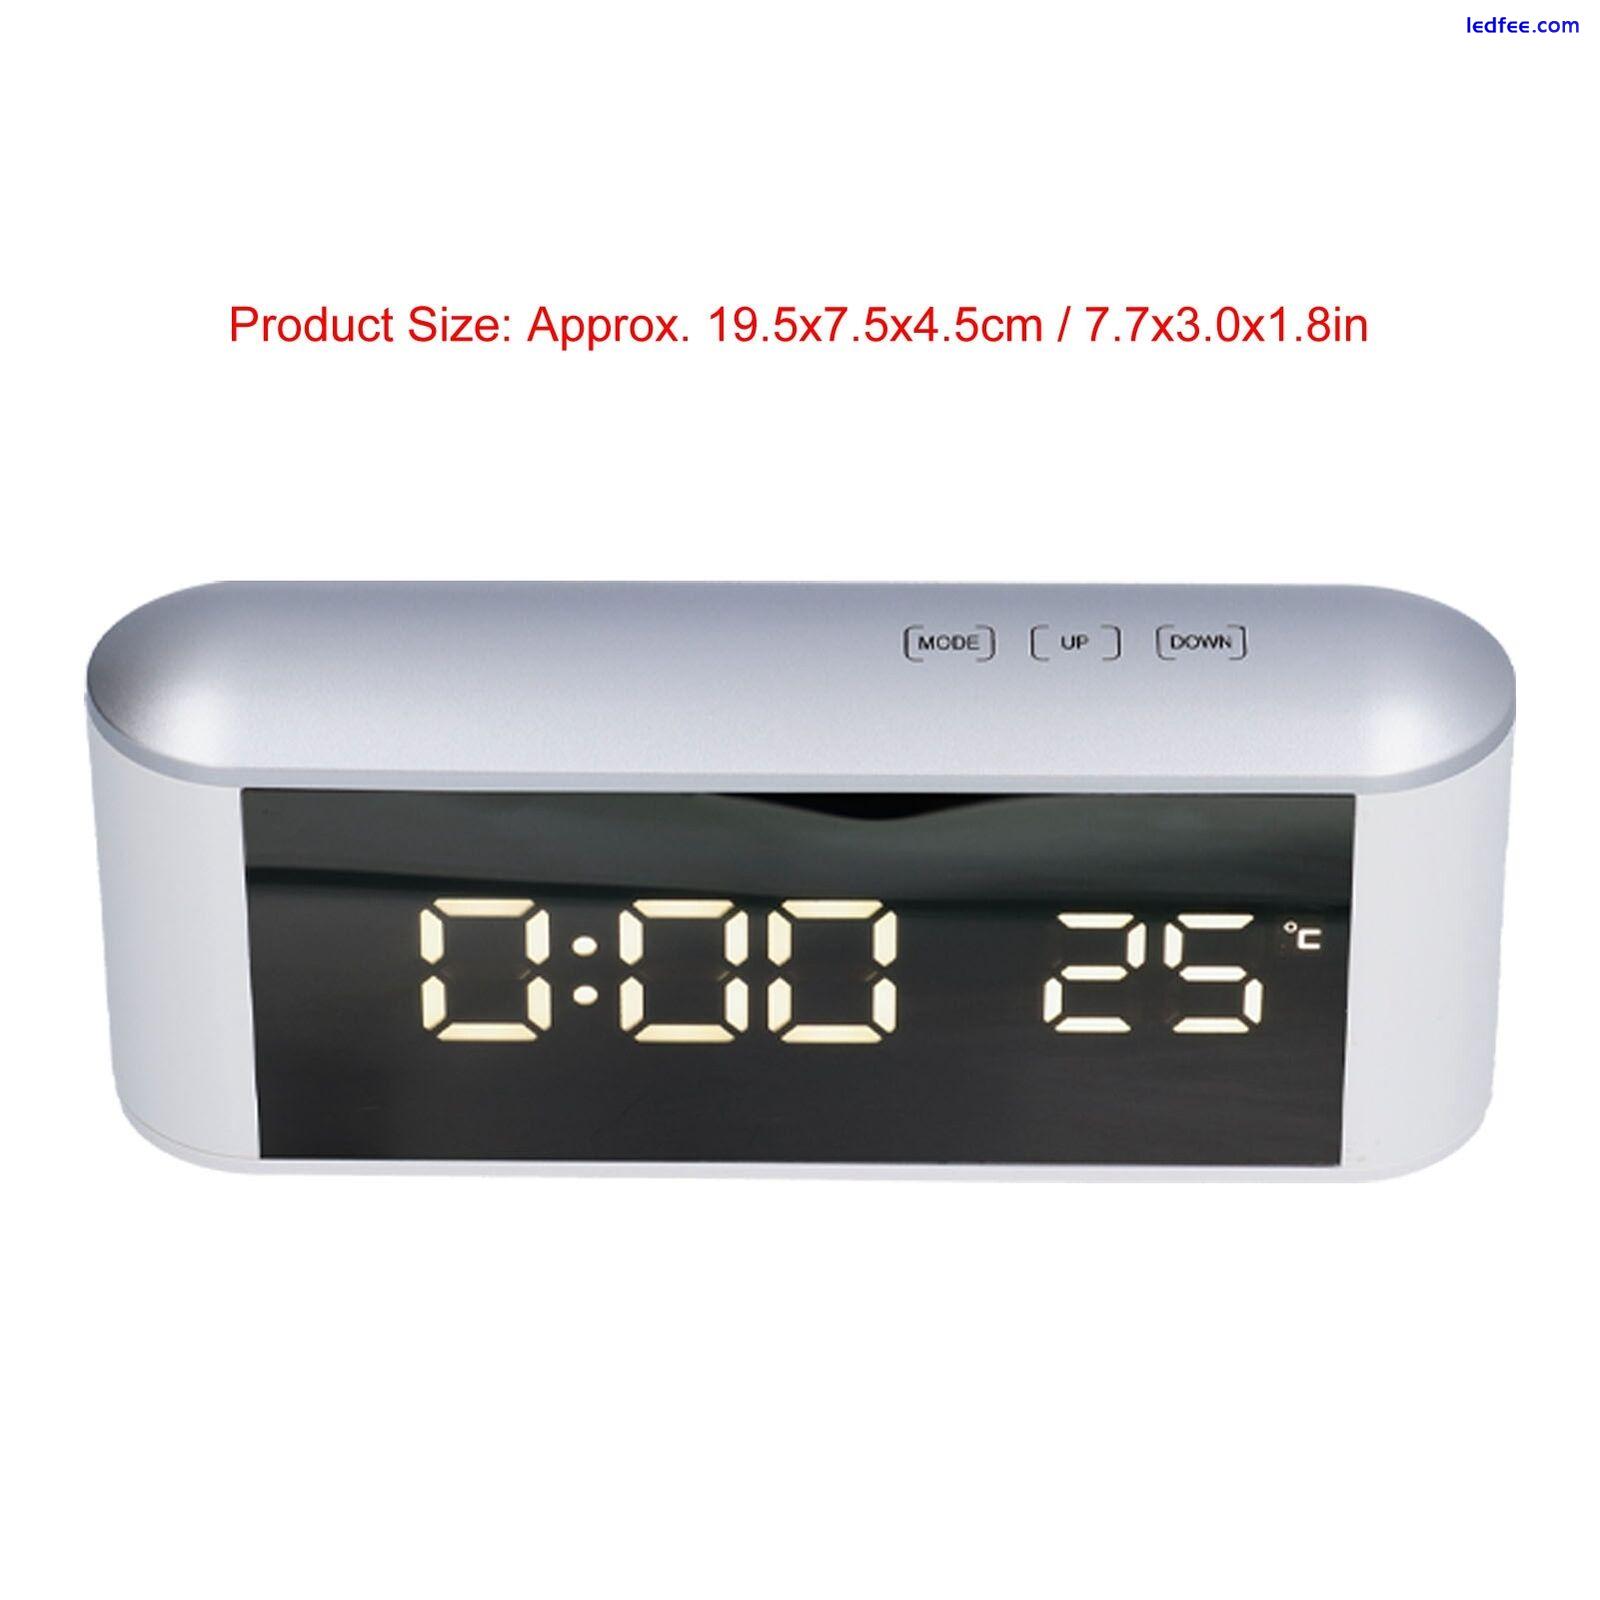 LED Alarm Clock Household Multifunctional Touch Screen Alarm Clock Indoor New 4 